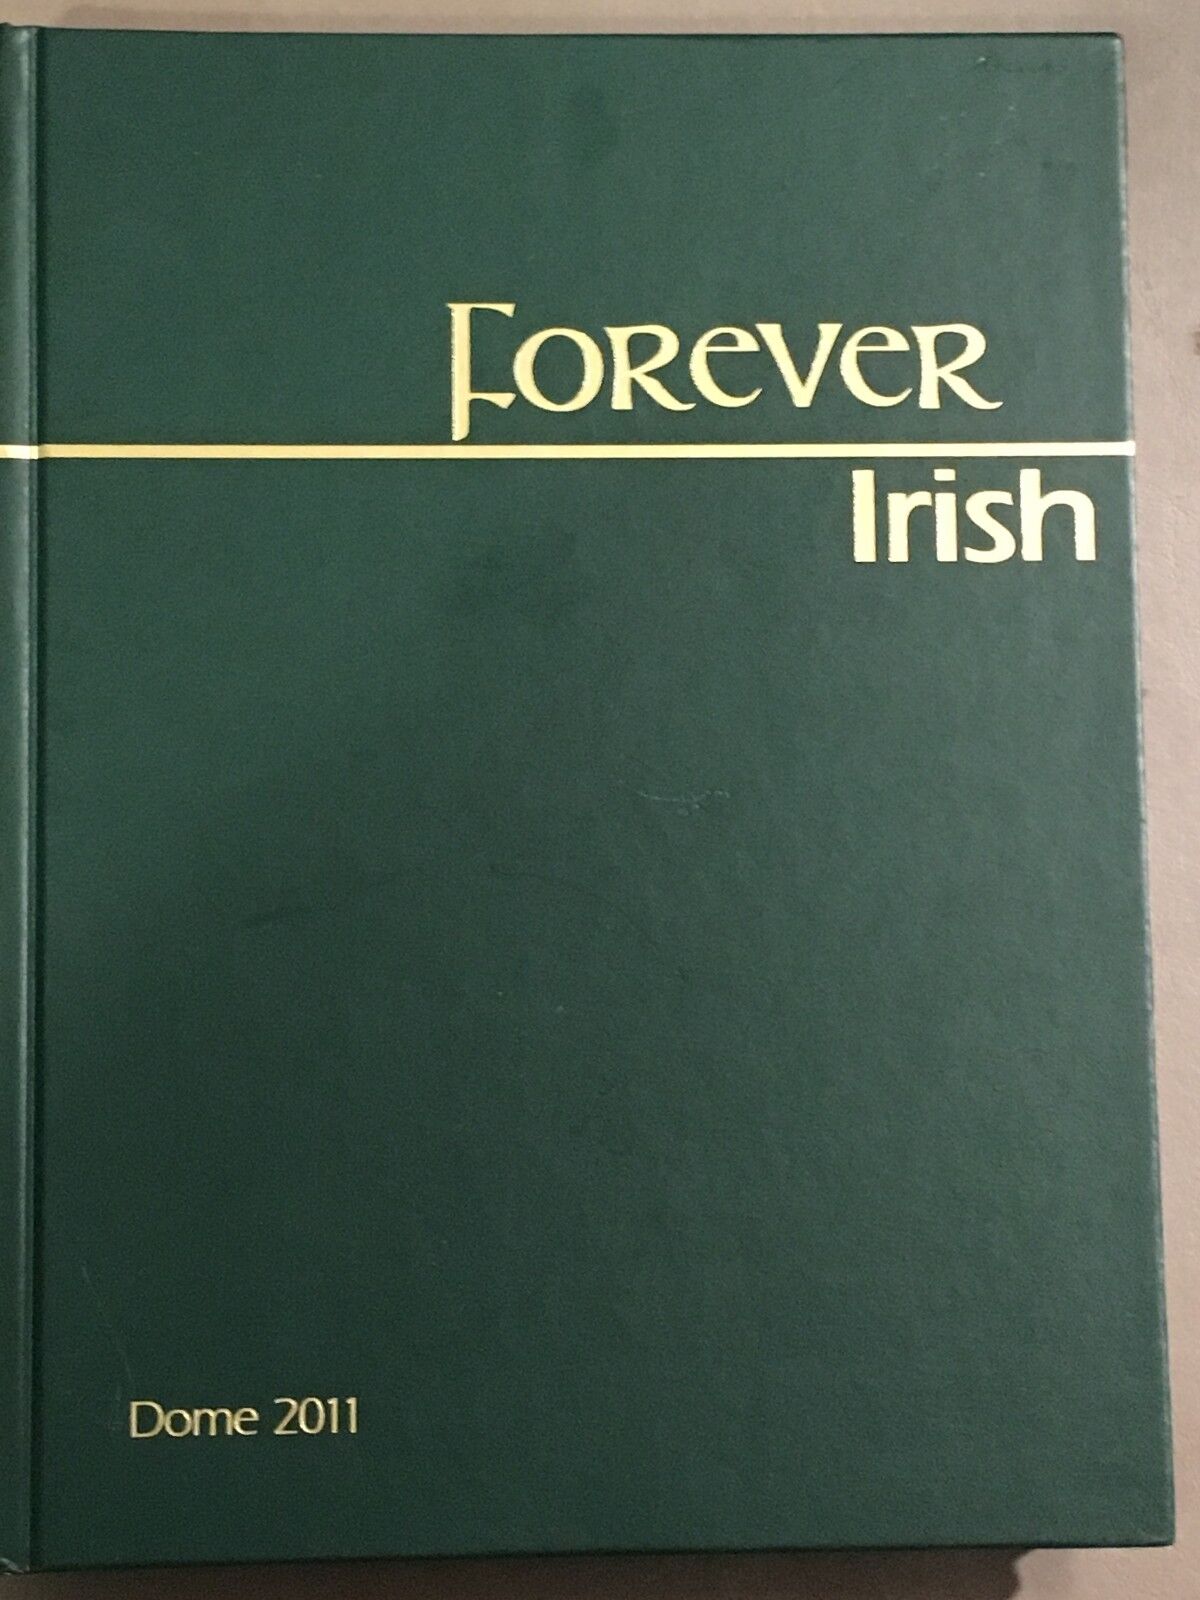 Dome 2011 University of Notre Dame Yearbook Vol 102 Forever Irish